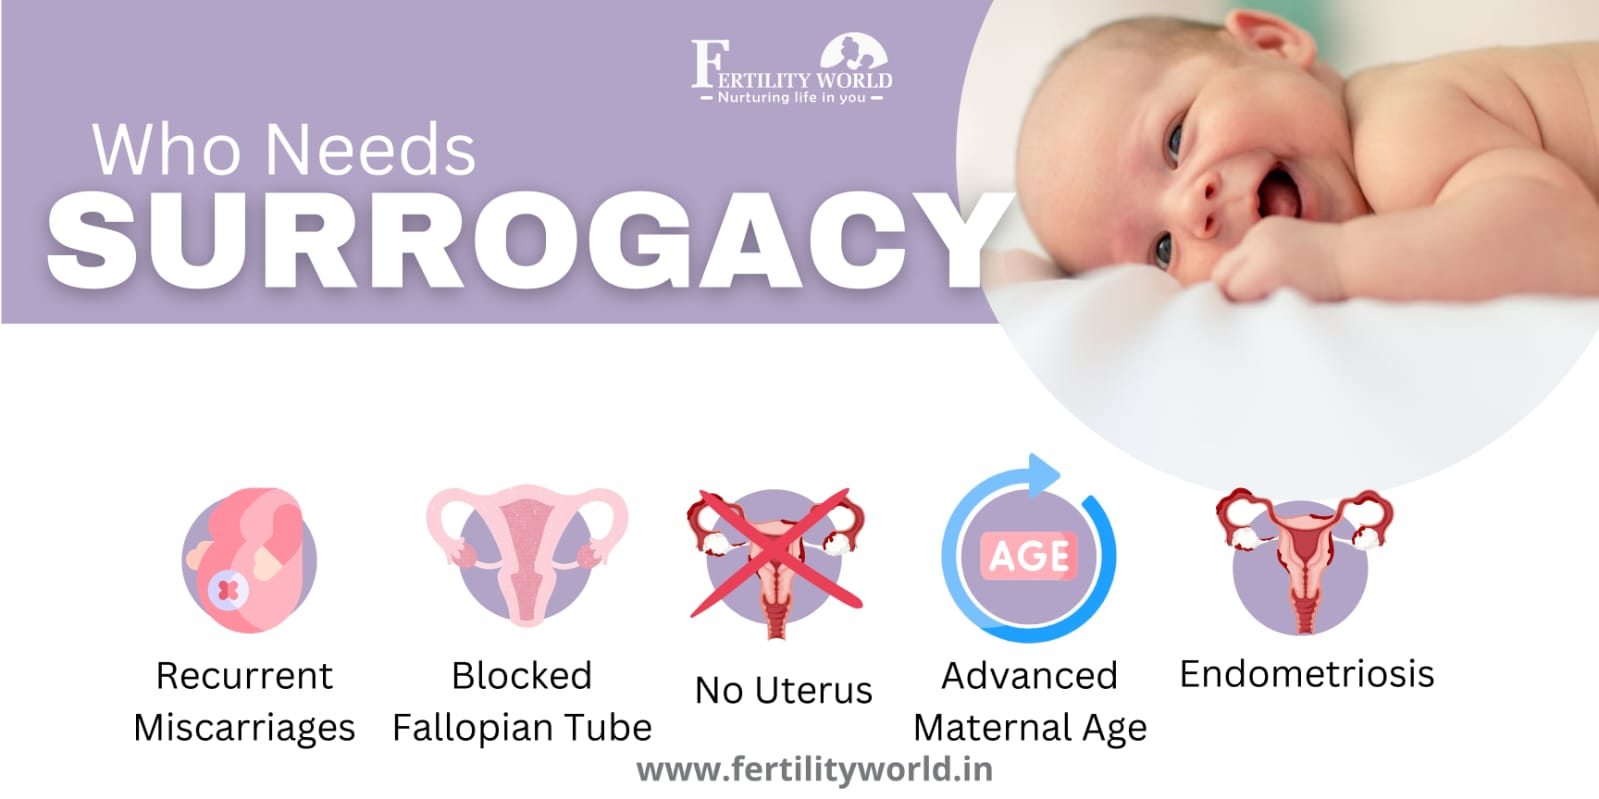 Who should go for surrogacy?